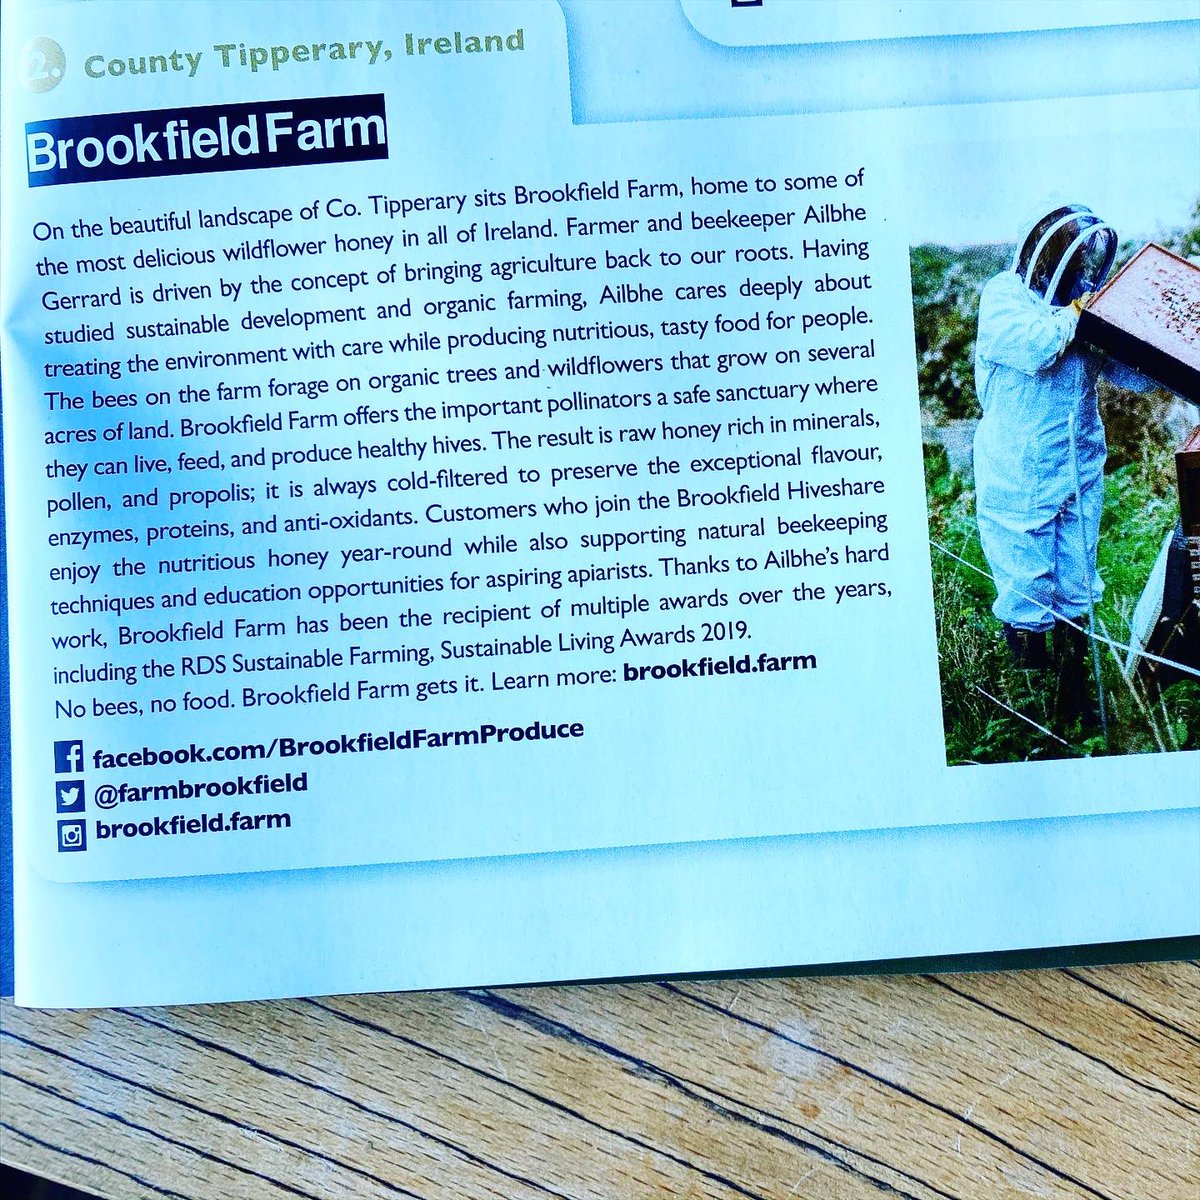 So delighted to open @gardenculturemagazine and see a lovely piece about @brookfield.farm. Thank you! #rawhoney #farmingfornature #biodiversity #farmtours